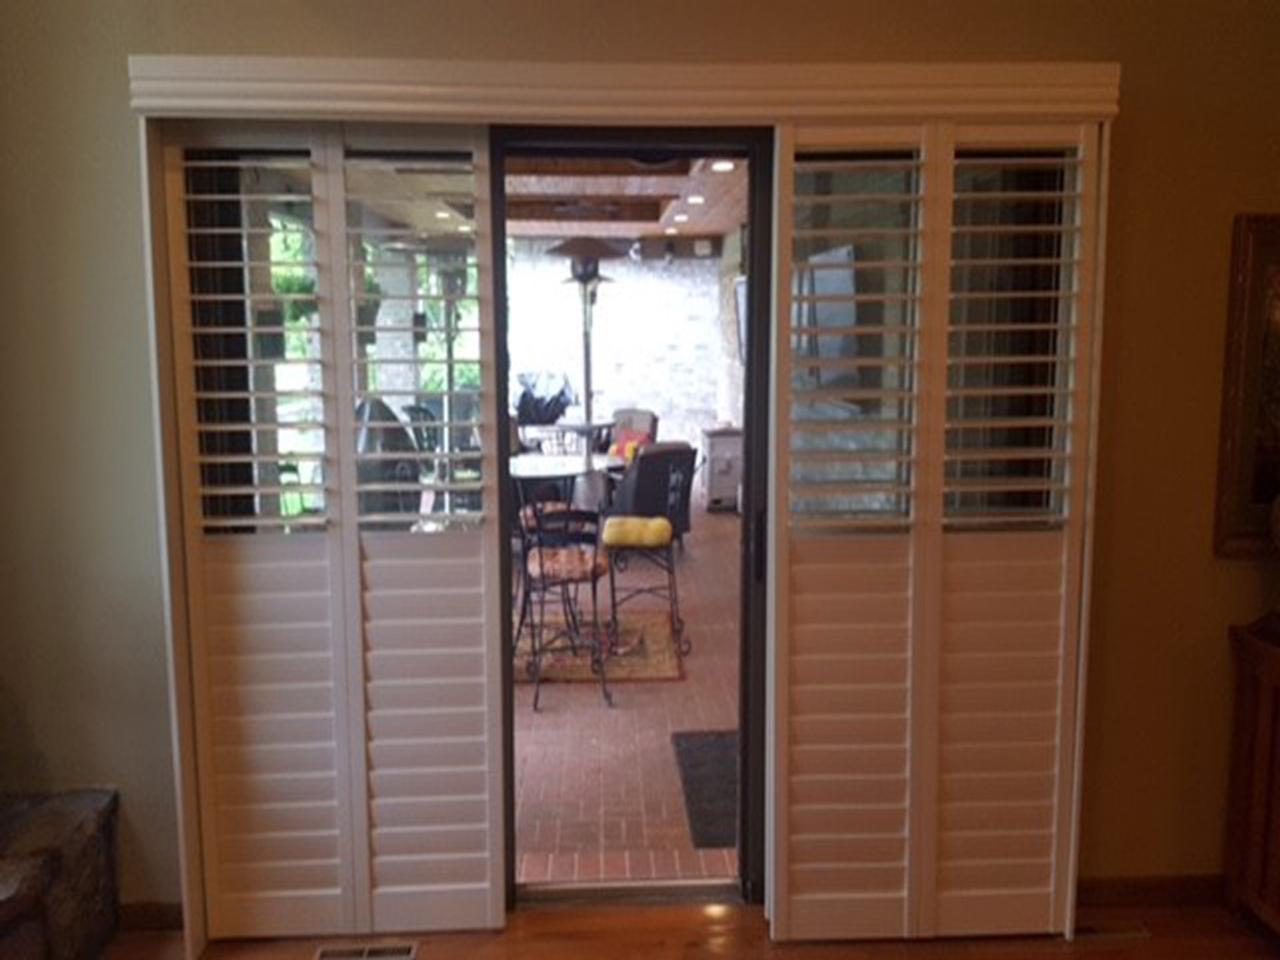 Bypass style plantation shutters pulled to the sides to show the sliding glass door, bottom portion of the louvers in closed position, top louvers open